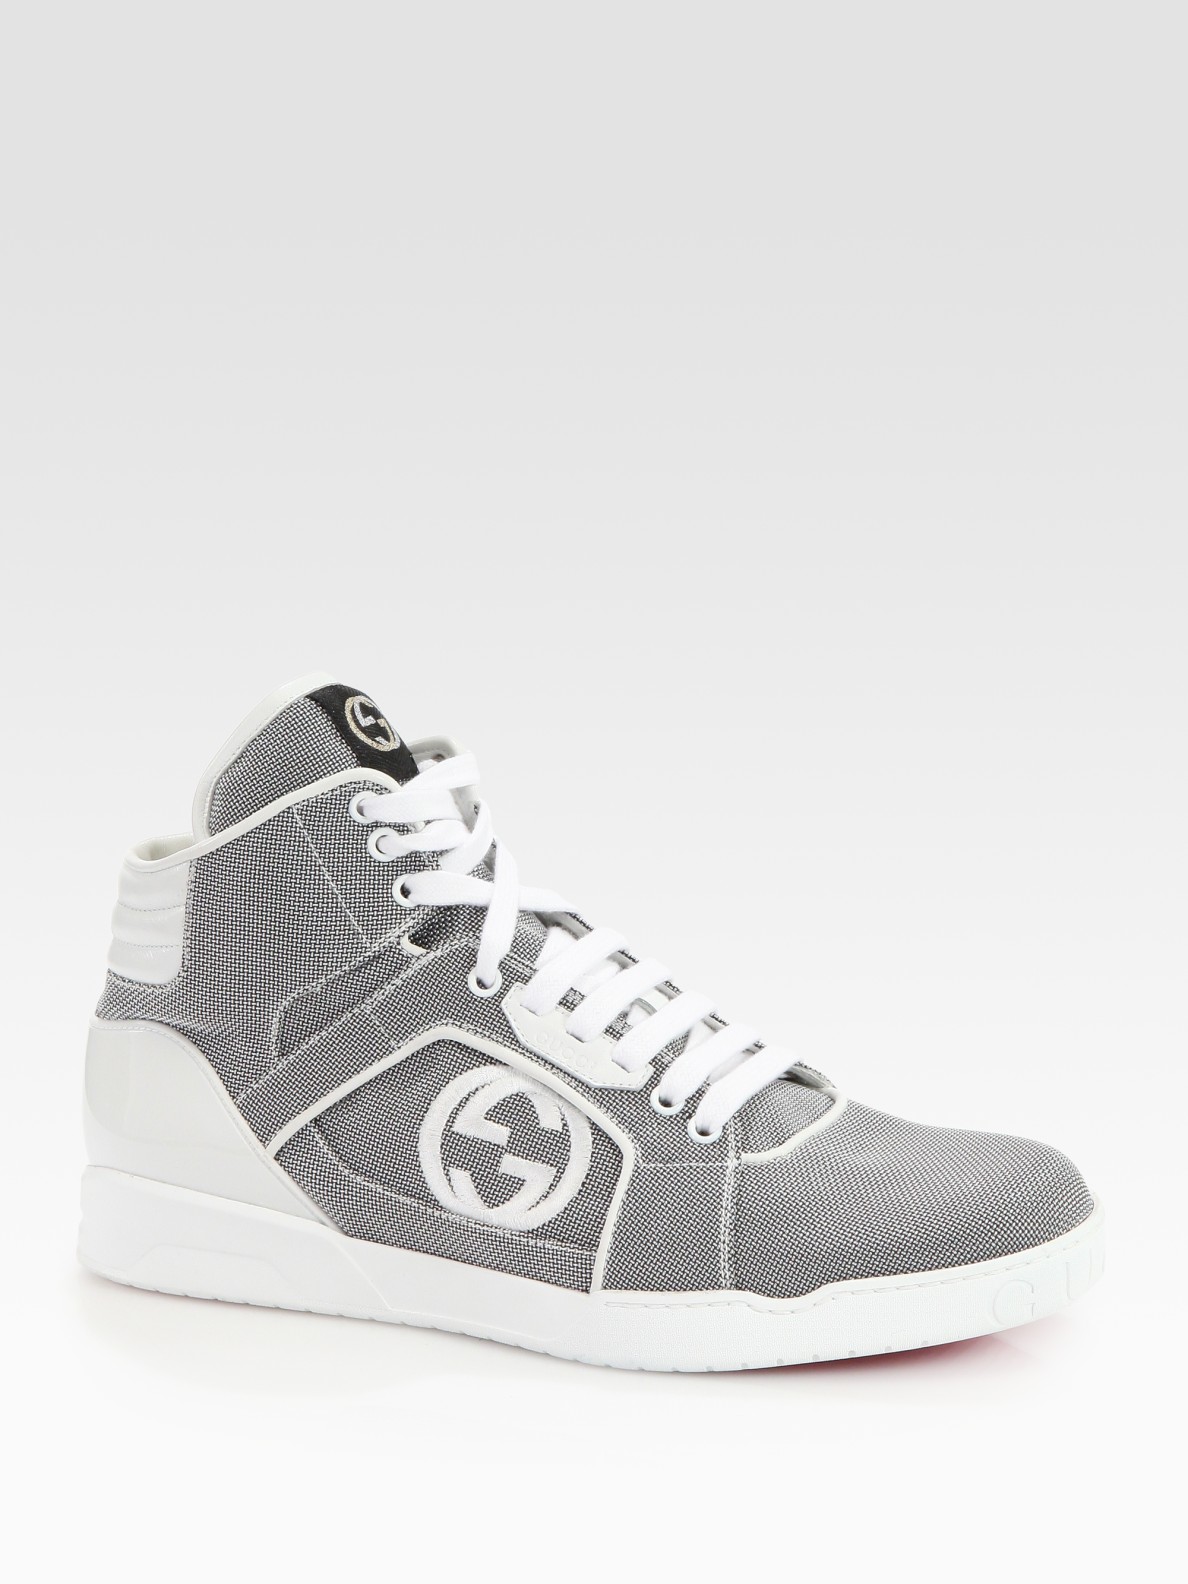 gucci shoes gray